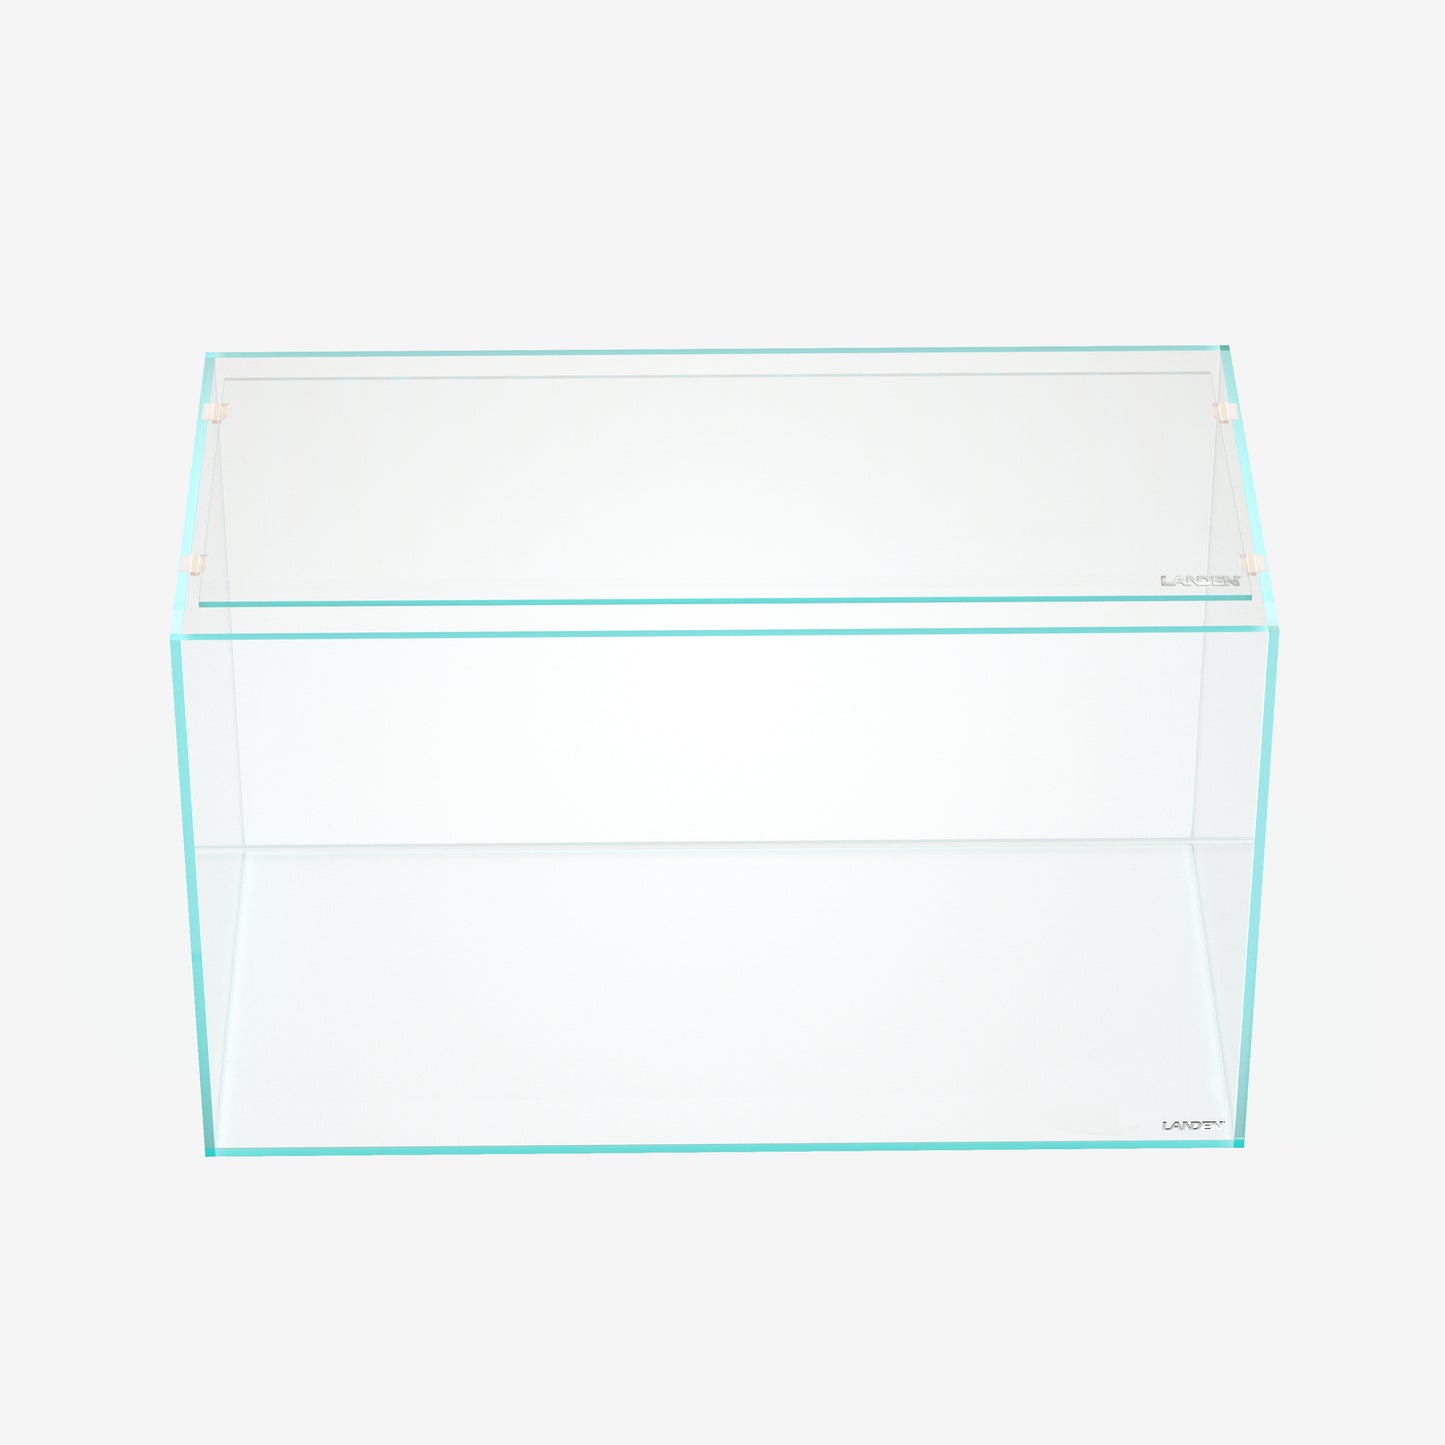 LANDEN 4mm Thick Clear Glass Aquarium Lid,Includes 4 Clips for Secure Placement, 580 x 230mm,(22.83x9.06 inches) Adapted to SD603036